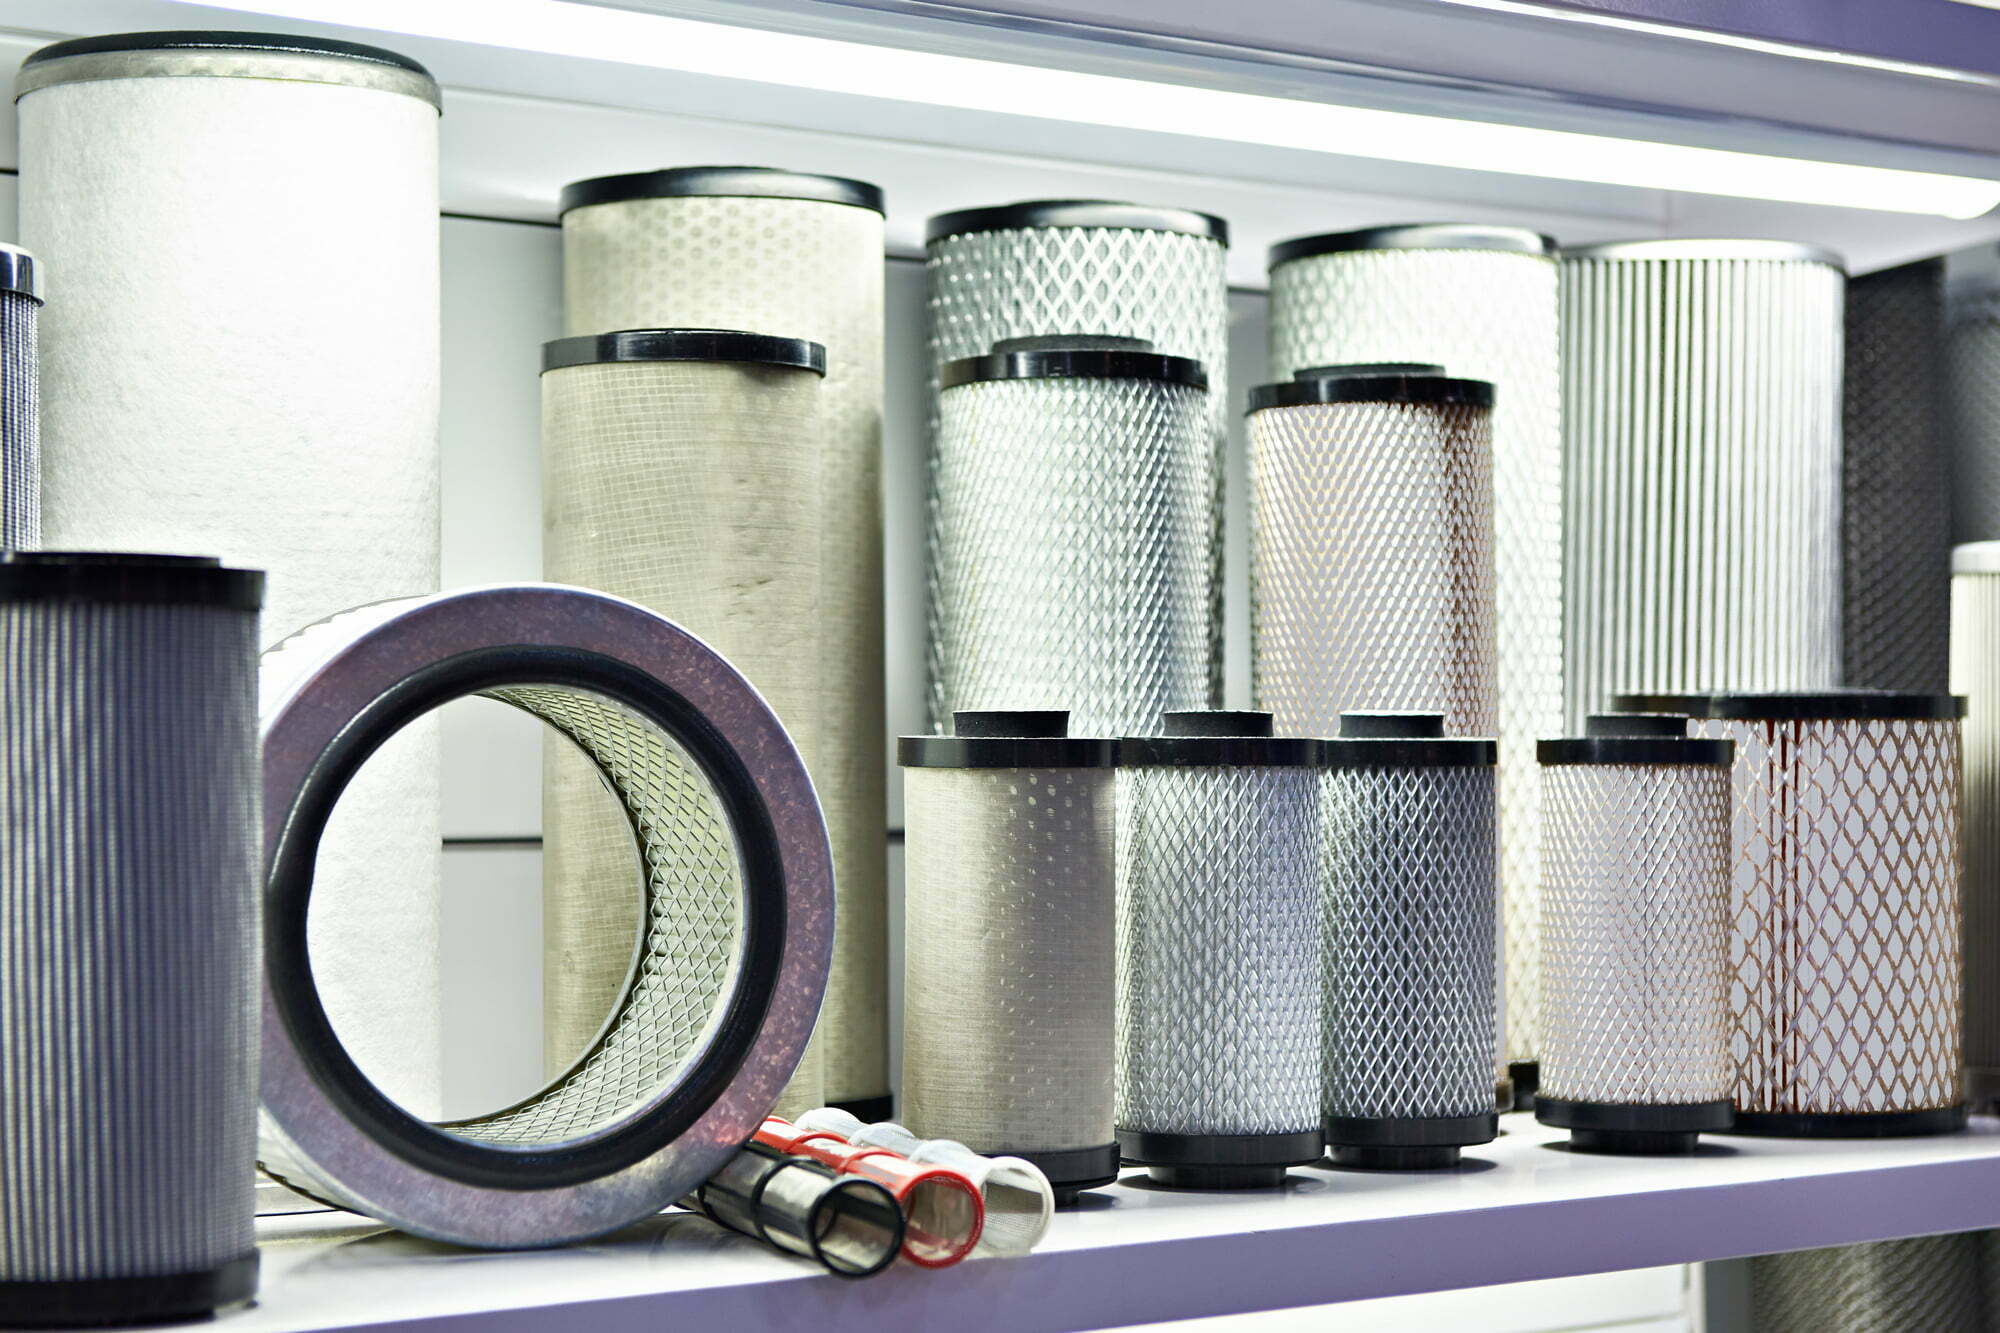 Mospart | Understanding Different Types of Air Filters for HVAC Systems